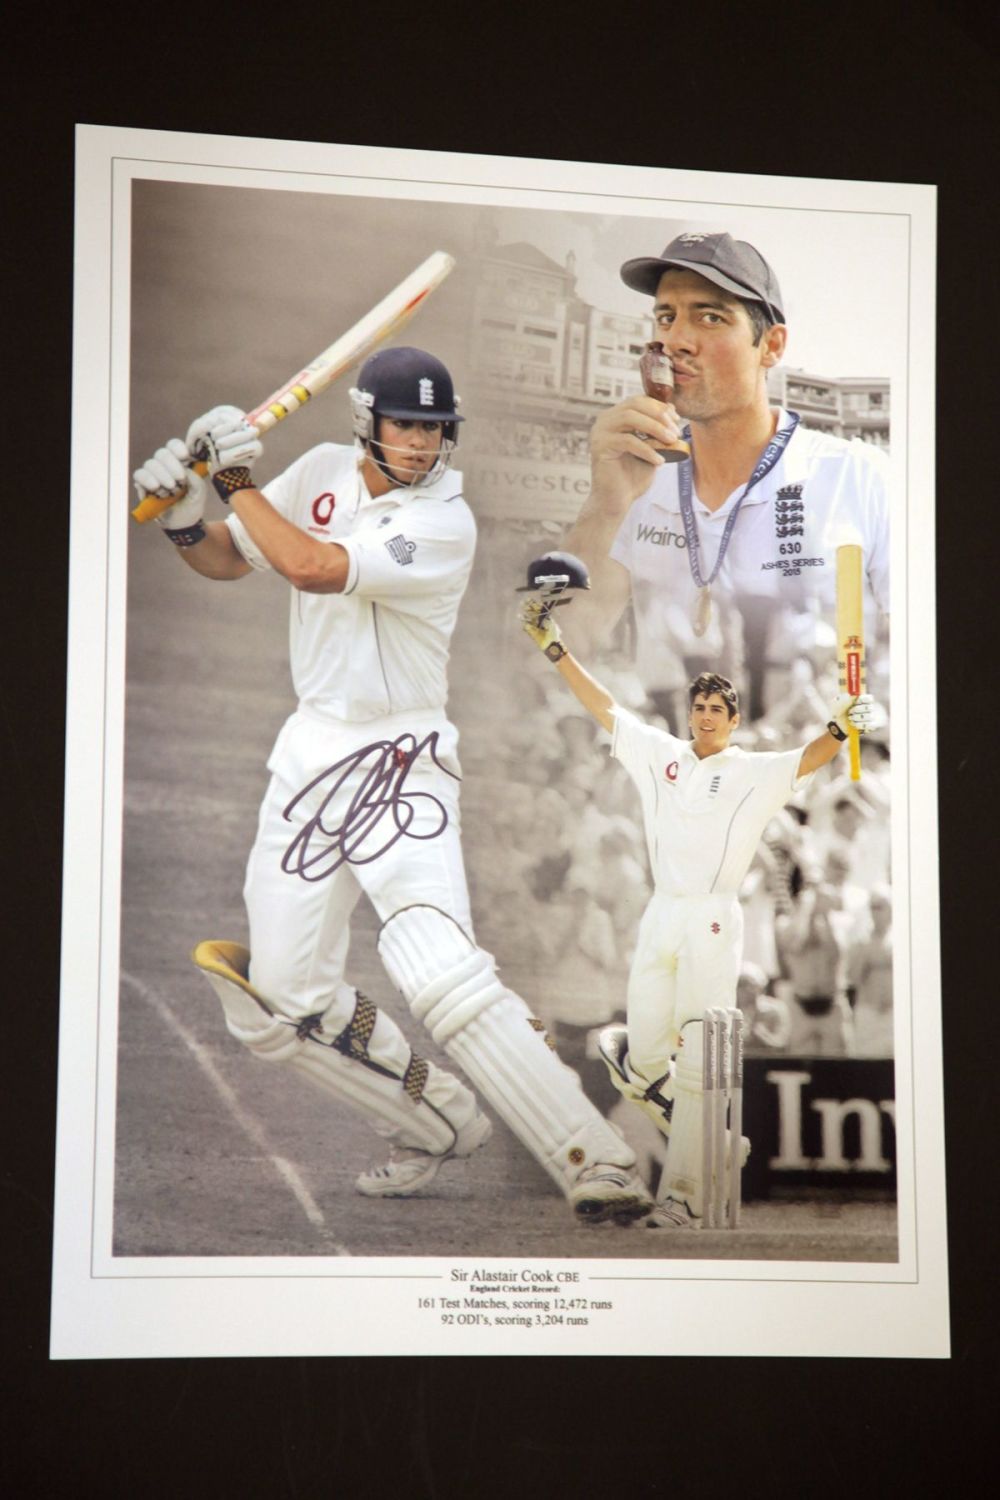 Alastair Cook 12x16 Signed Photograph : A